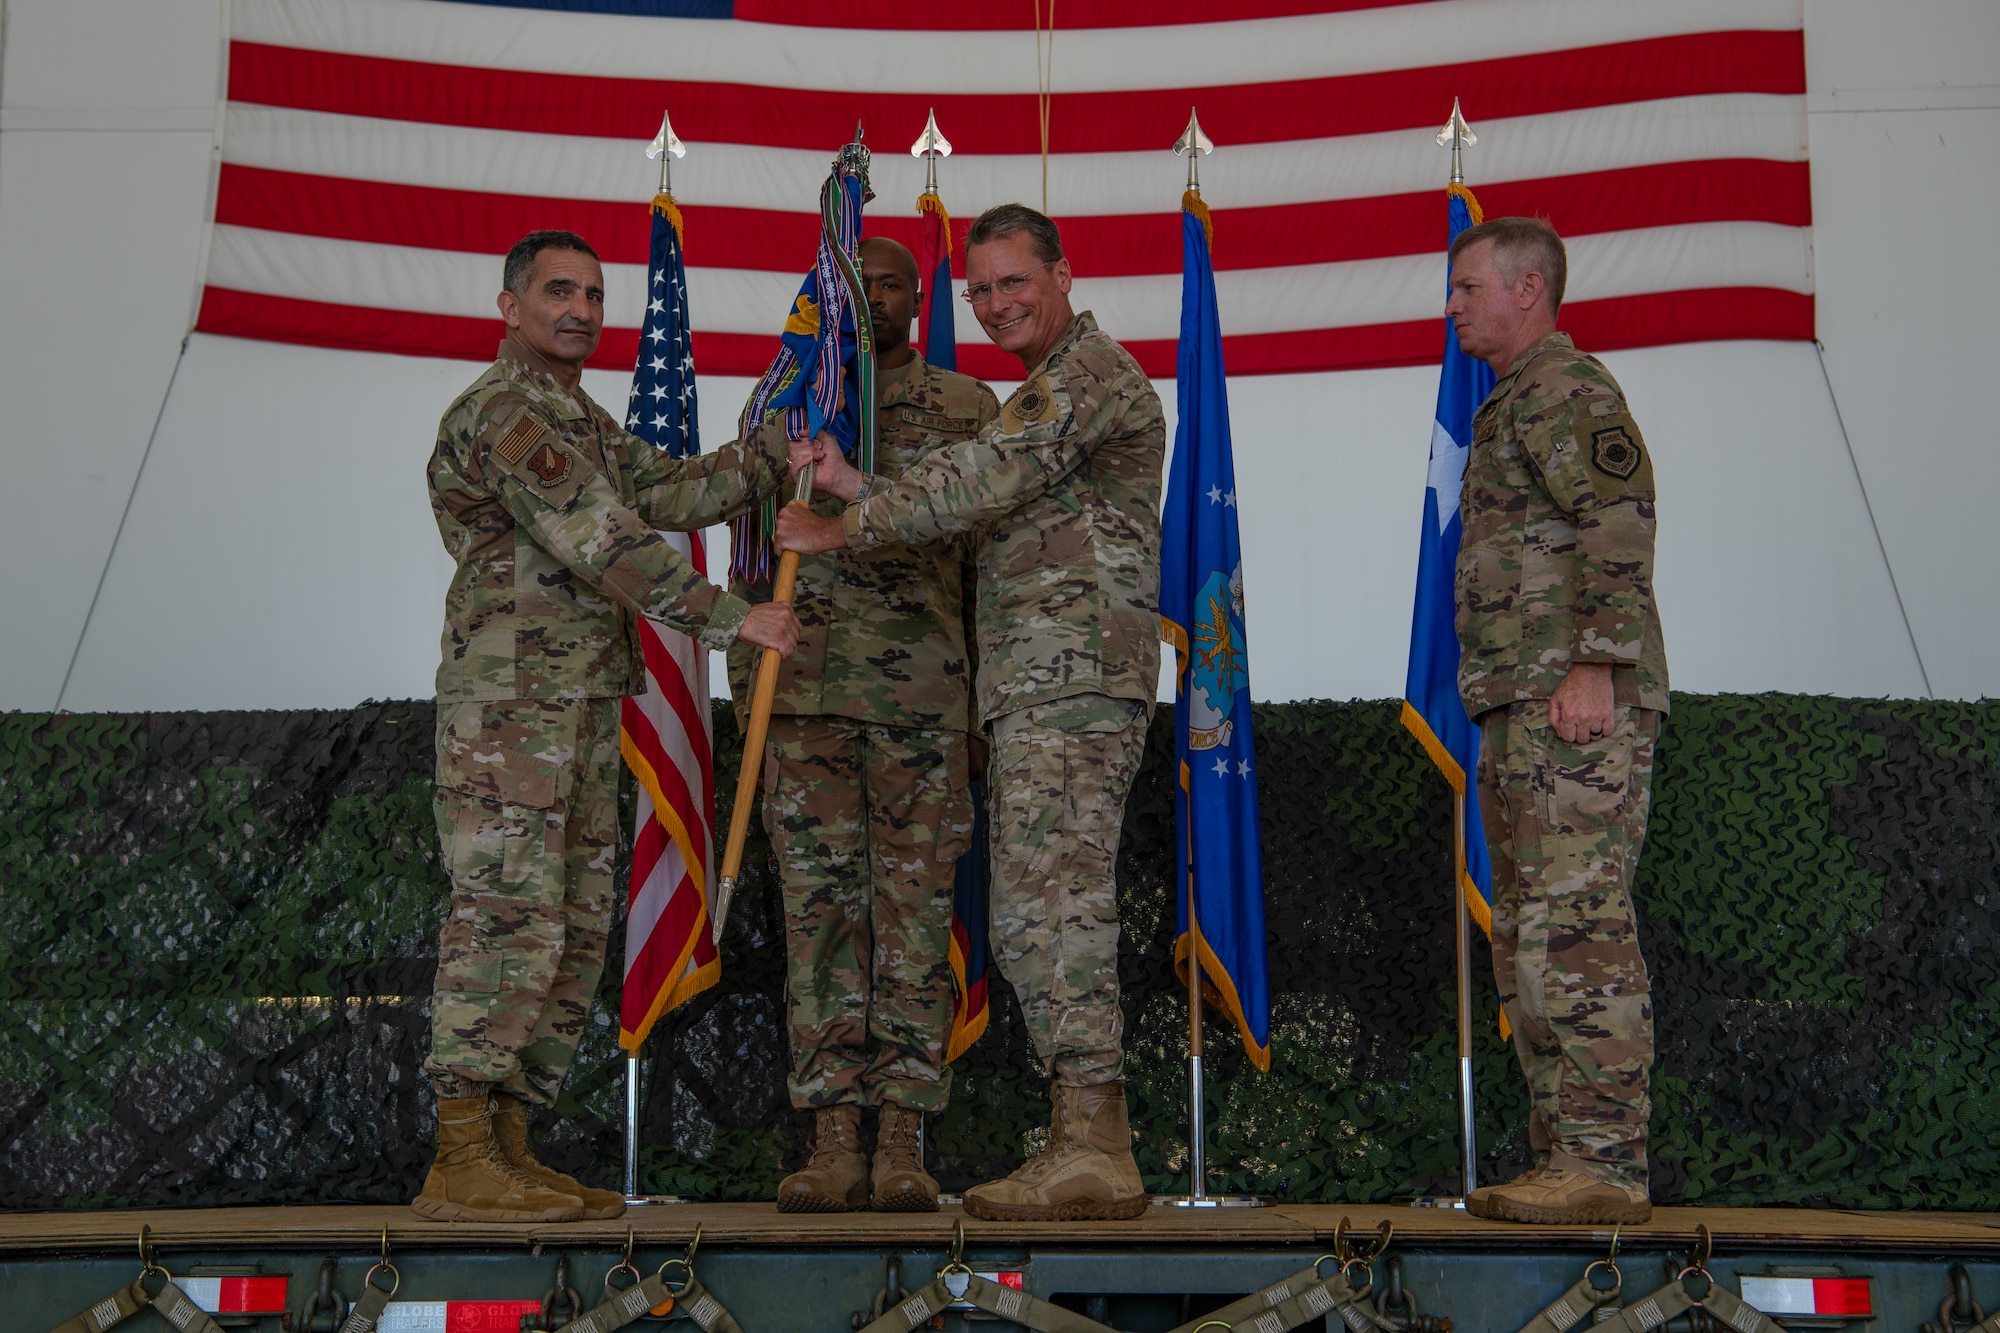 U.S. Air Force Lt. Gen. David Nahom, commander, 11th Air Force, relinquishes the 36th Wing guidon to Brig. Gen. Thomas Palenske, during the 36th Wing change of command ceremony, June 30, 2023, at Andersen Air Force Base, Guam.